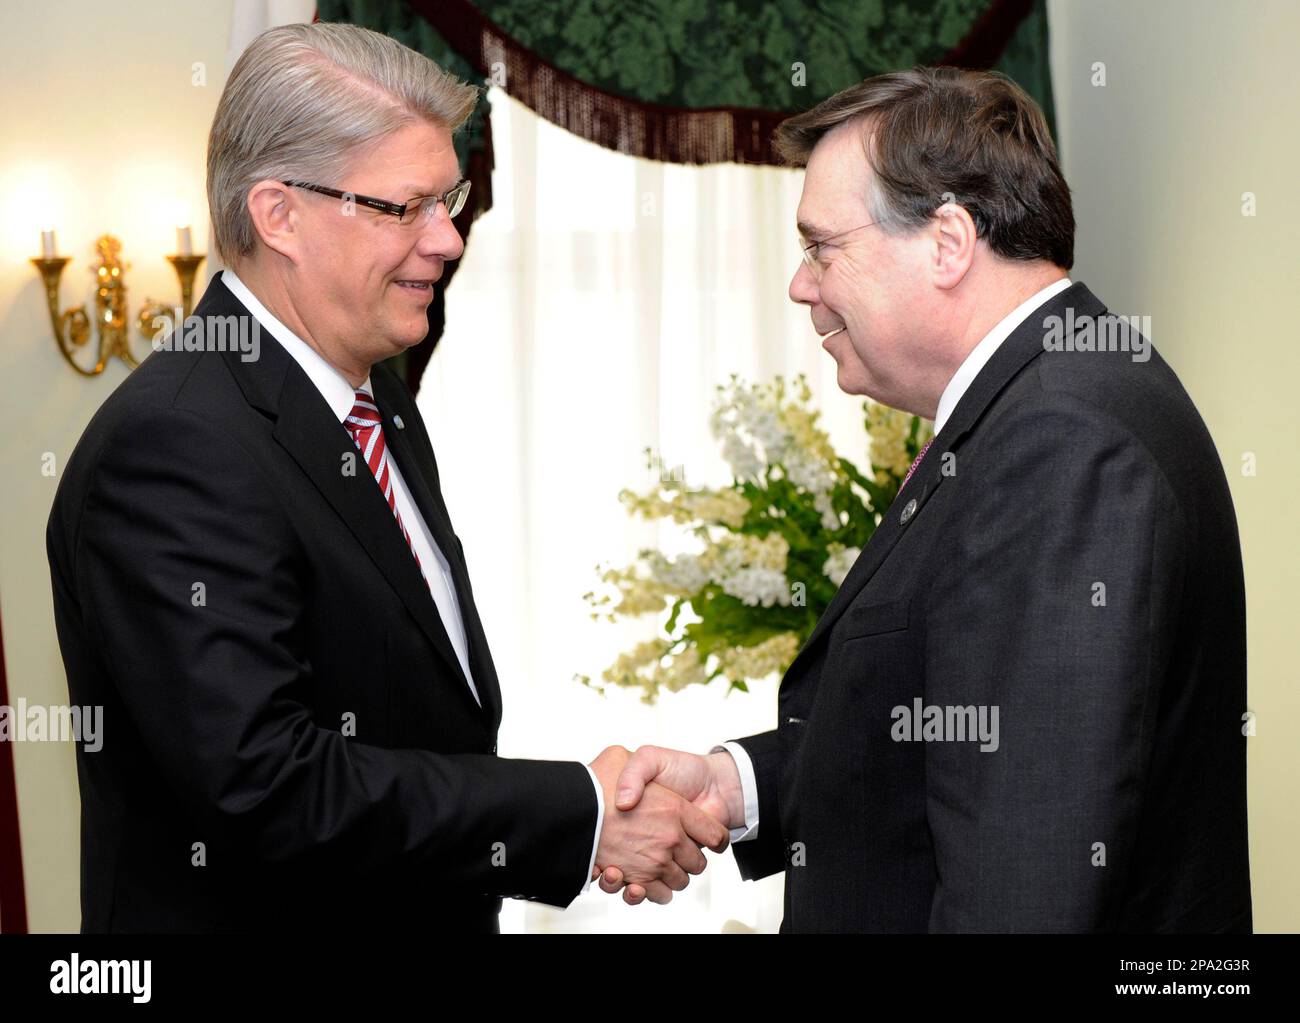 Latvia's President Valdis Zatlers, left, shake hands, with Iceland's Prime Minister Geir Haarde during a a Summit of the Heads of Government Council of the Baltic Sea States in the House of Blackheads in Riga ,Latvia,Wednesday, June 4, 2008. (AP Photo/Roman Koksarov) Banque D'Images